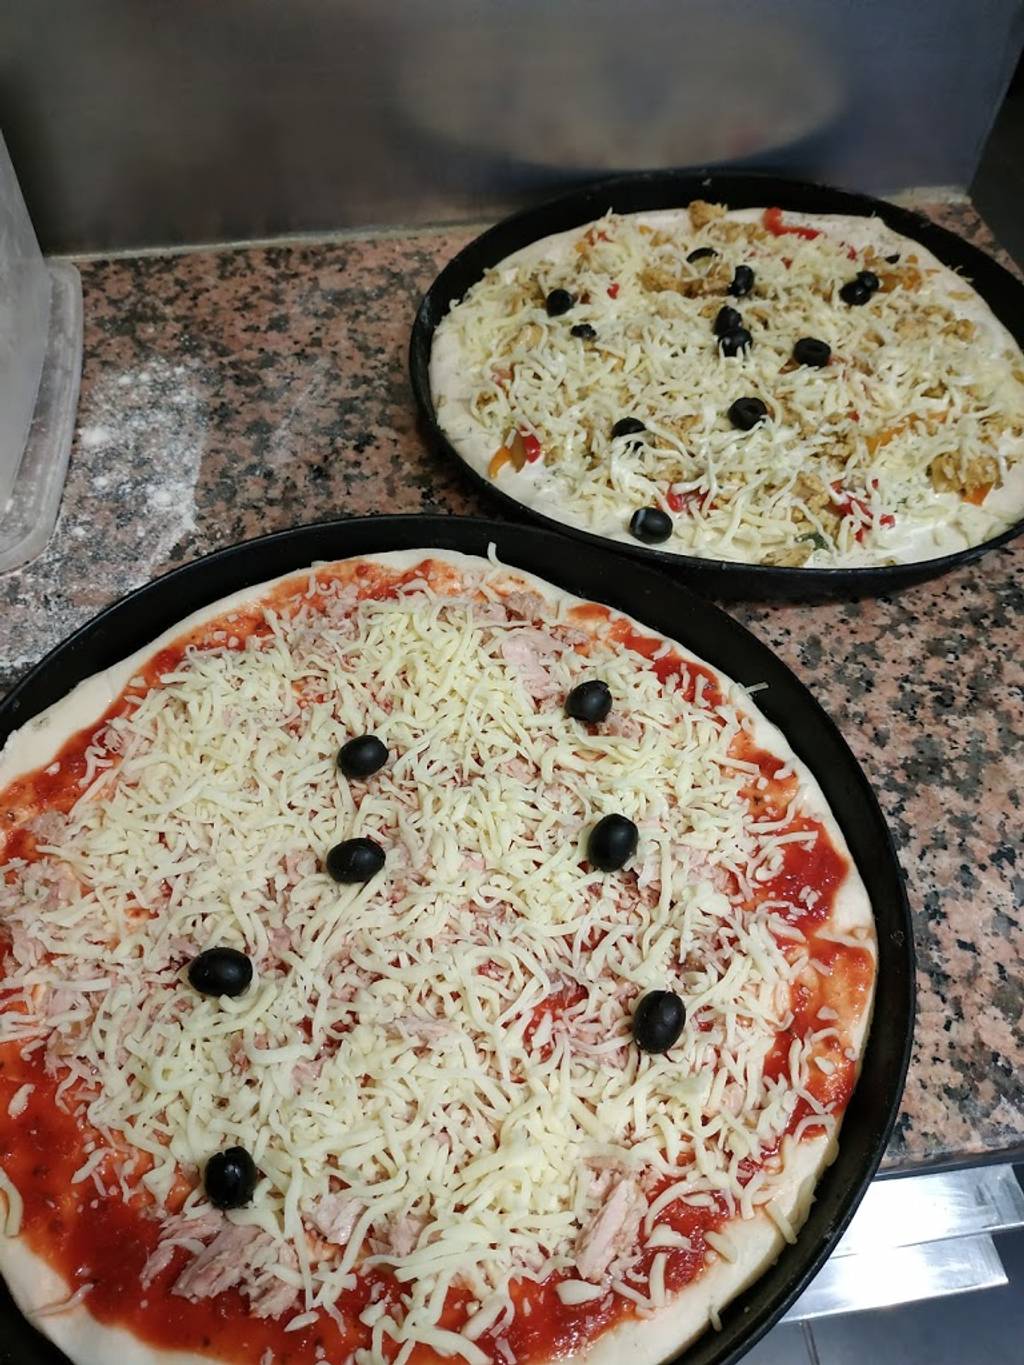 ALL IN PIZZA Tourcoing - Food Pizza Ingredient Recipe Baked goods